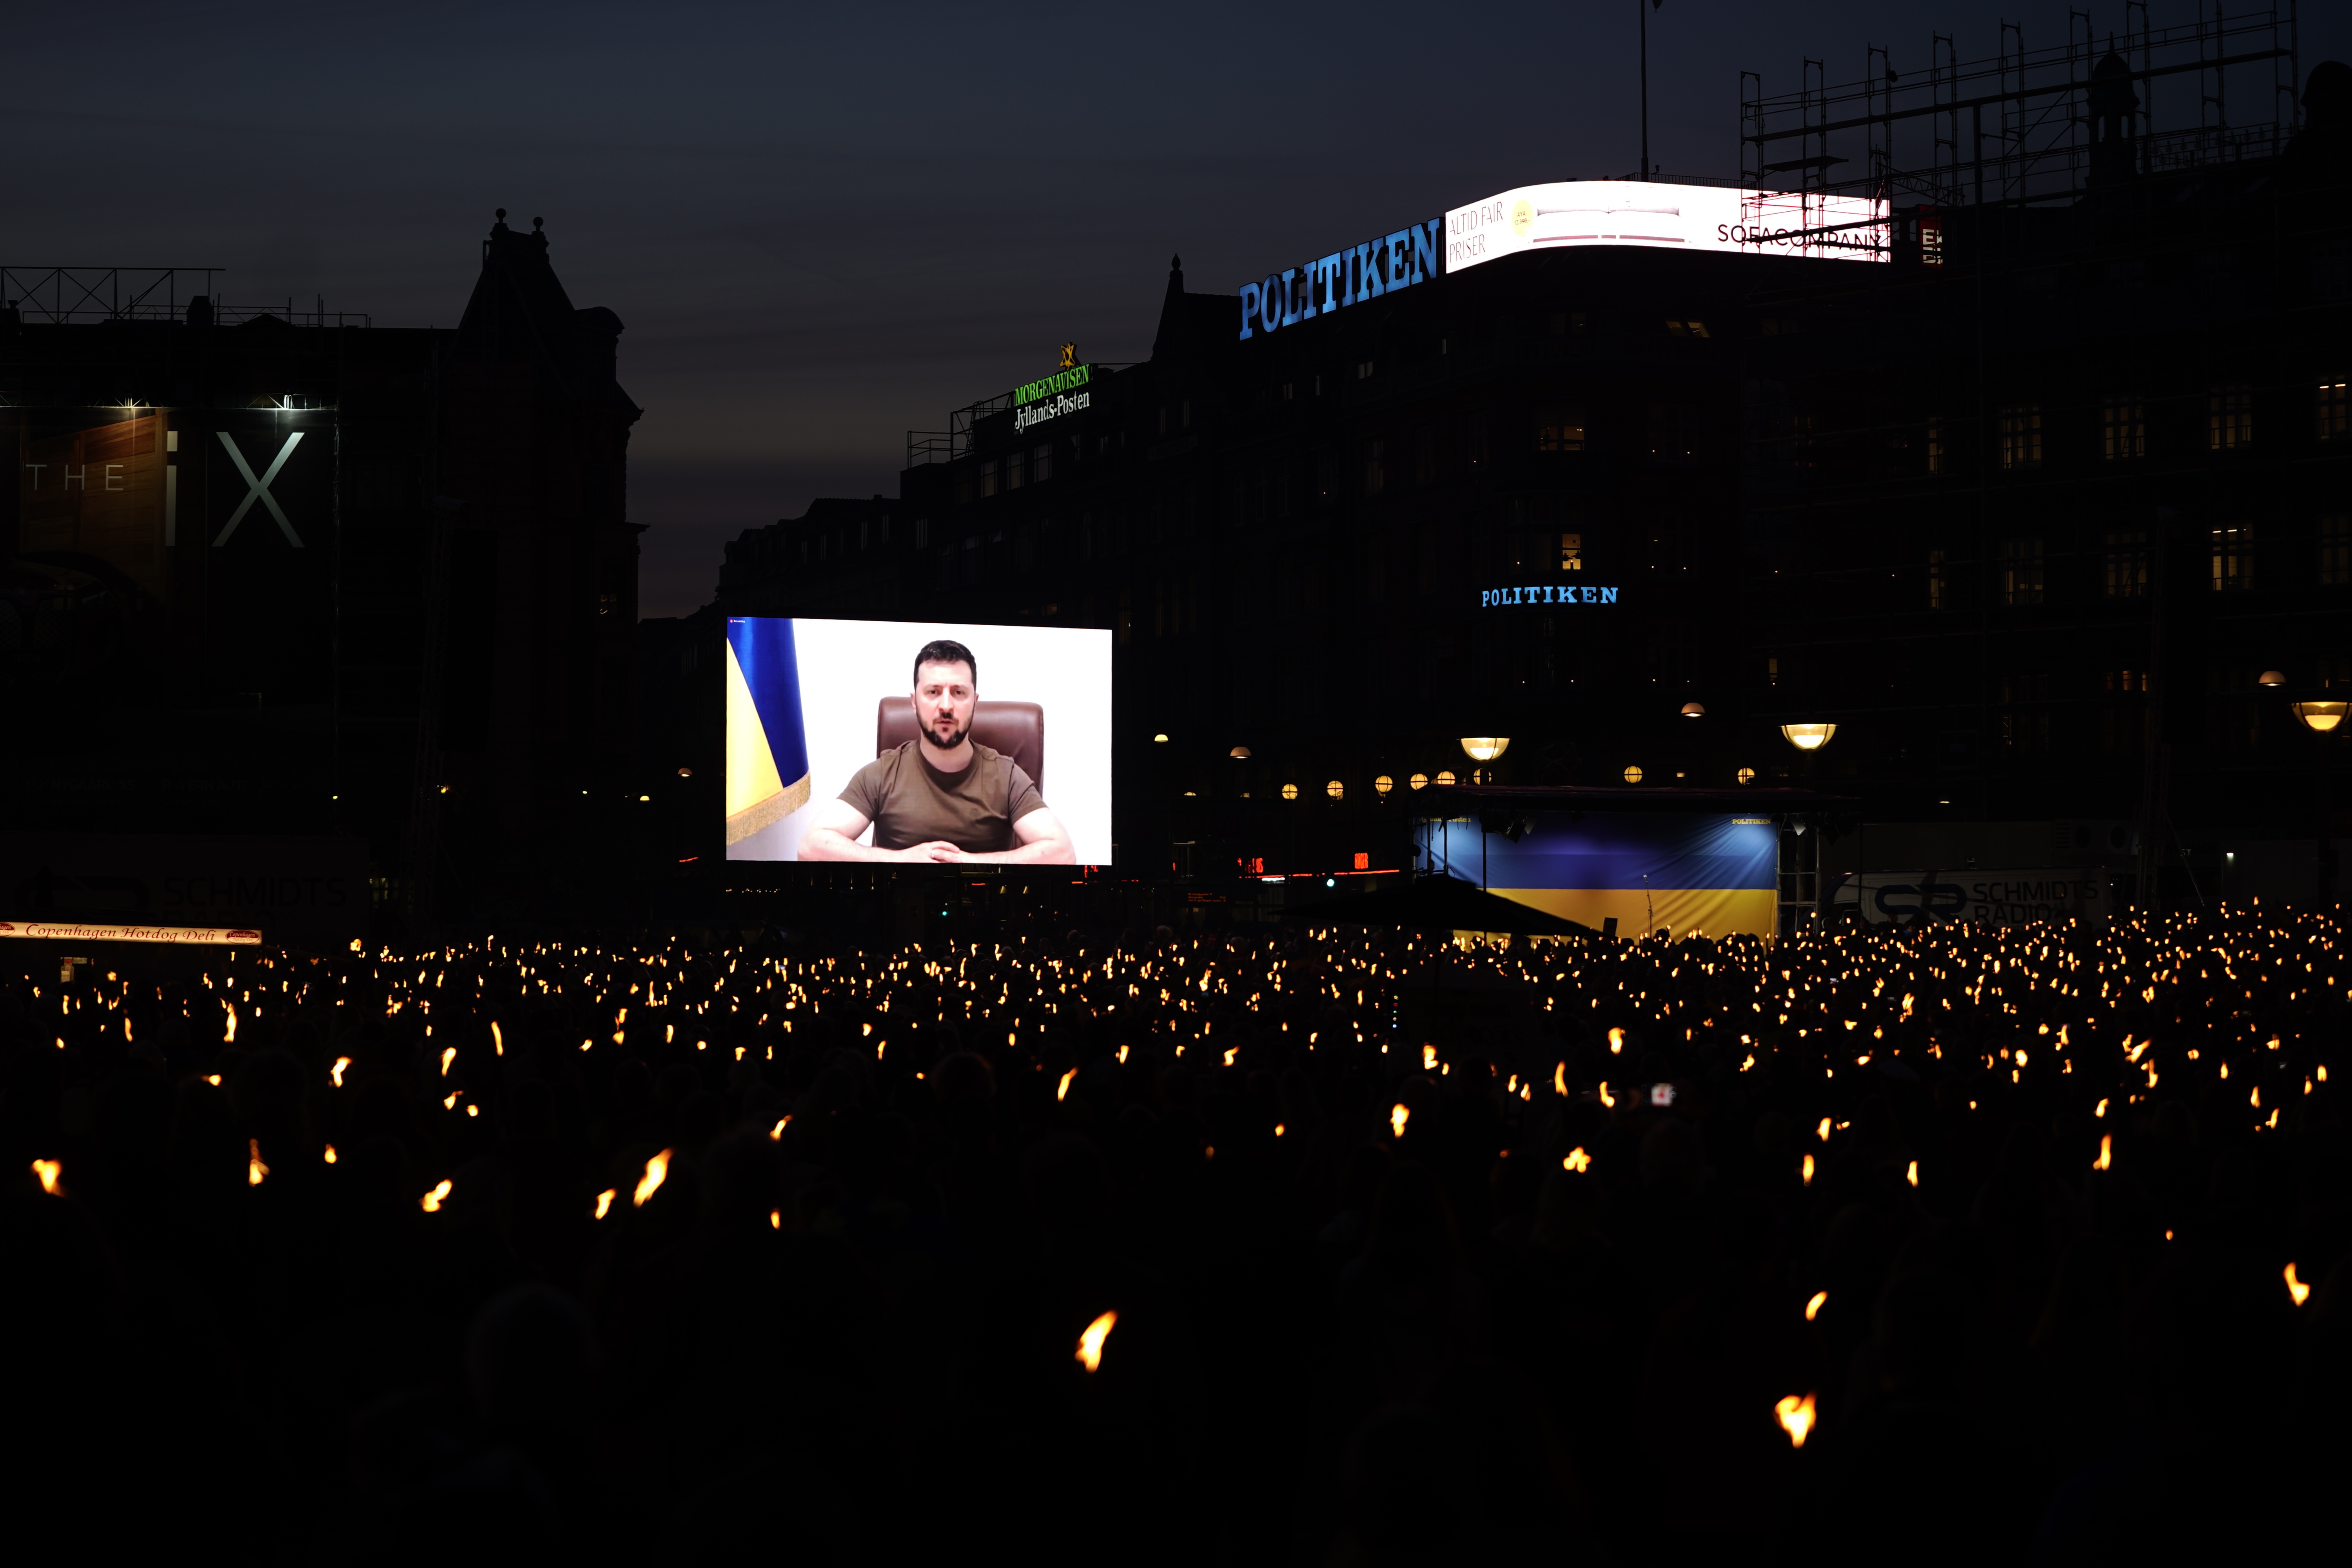 epa09927001 Ukranian President Volodymyr Zelensky appears on screen to address people at the City Hall Square in Copenhagen, Denmark, 04 May 2022. The event marking the 04 May anniversary of the Nordic country's liberation at the end of the Second World War, was organized by JP/Politiken Media Group. EPA-EFE/LISELOTTE SABROE DENMARK OUT